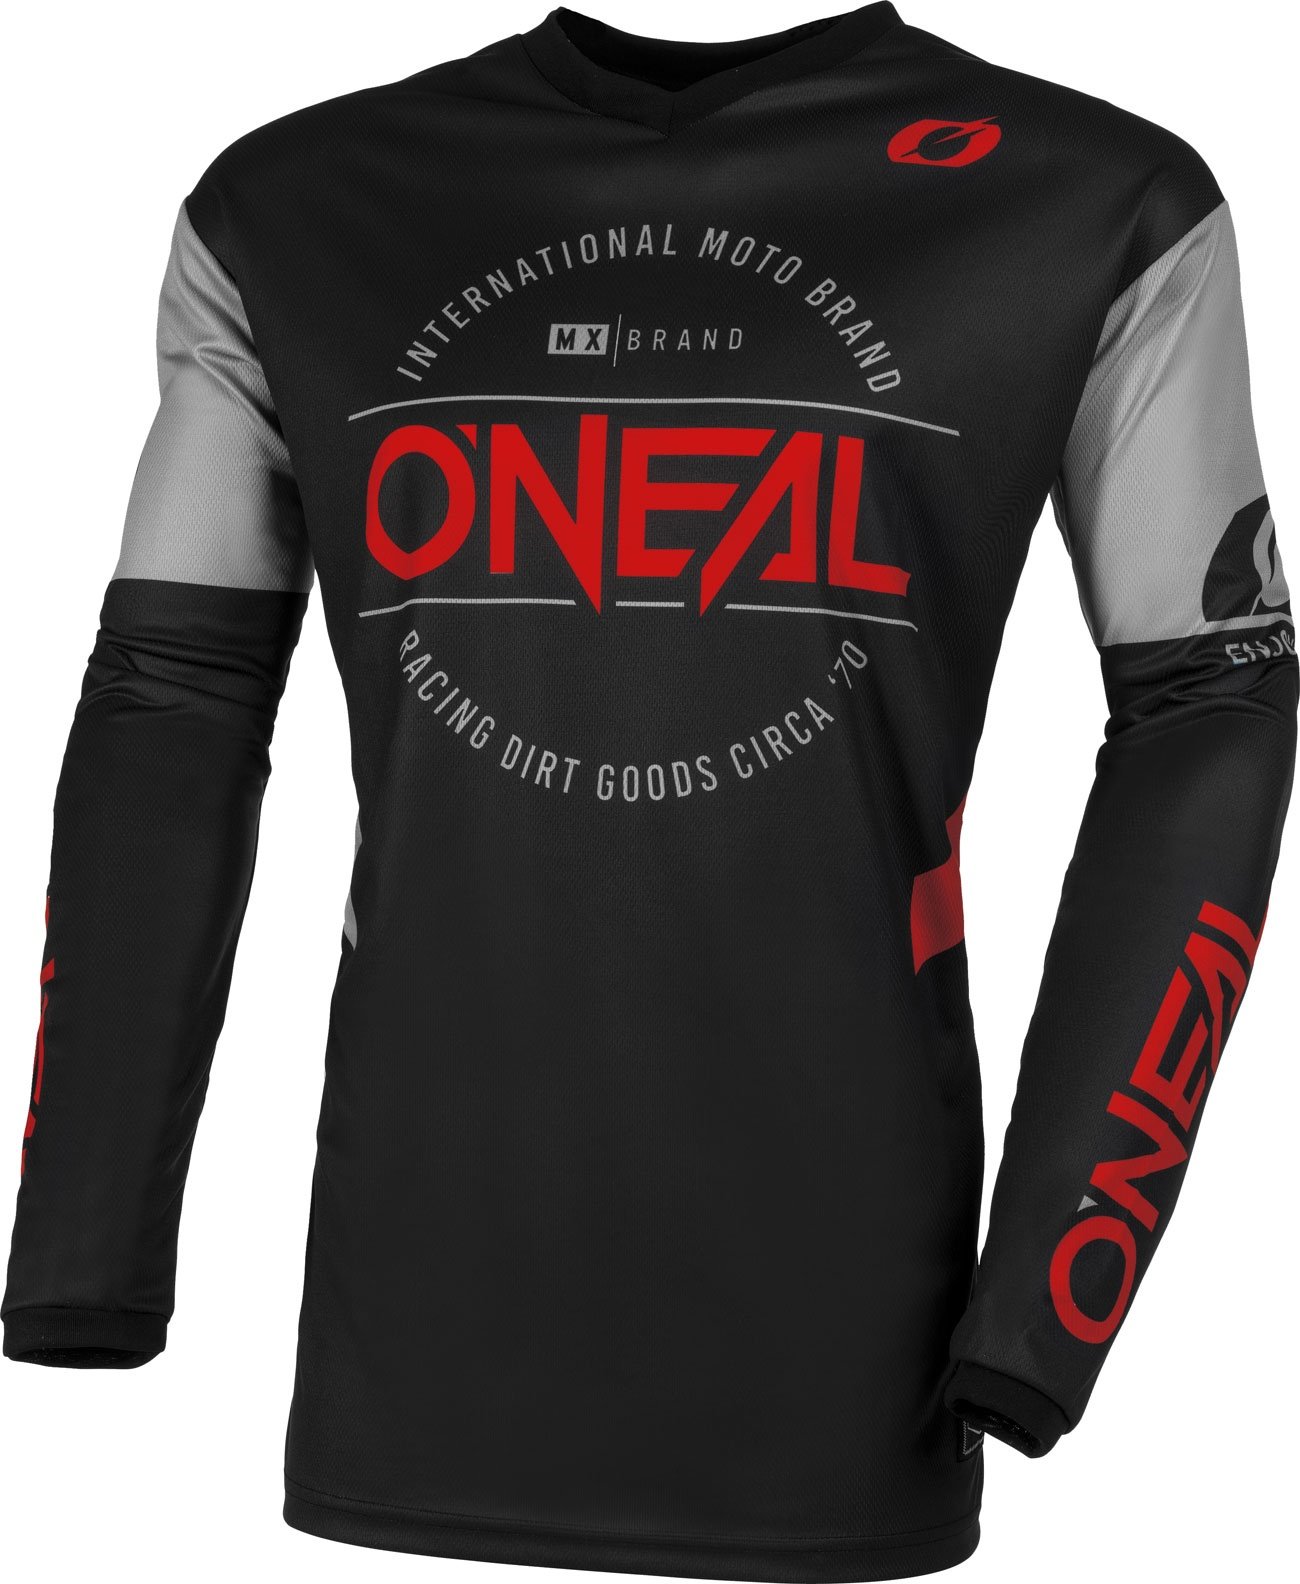 ONeal Element Brand S23, jersey - Noir/Rouge/Gris - M